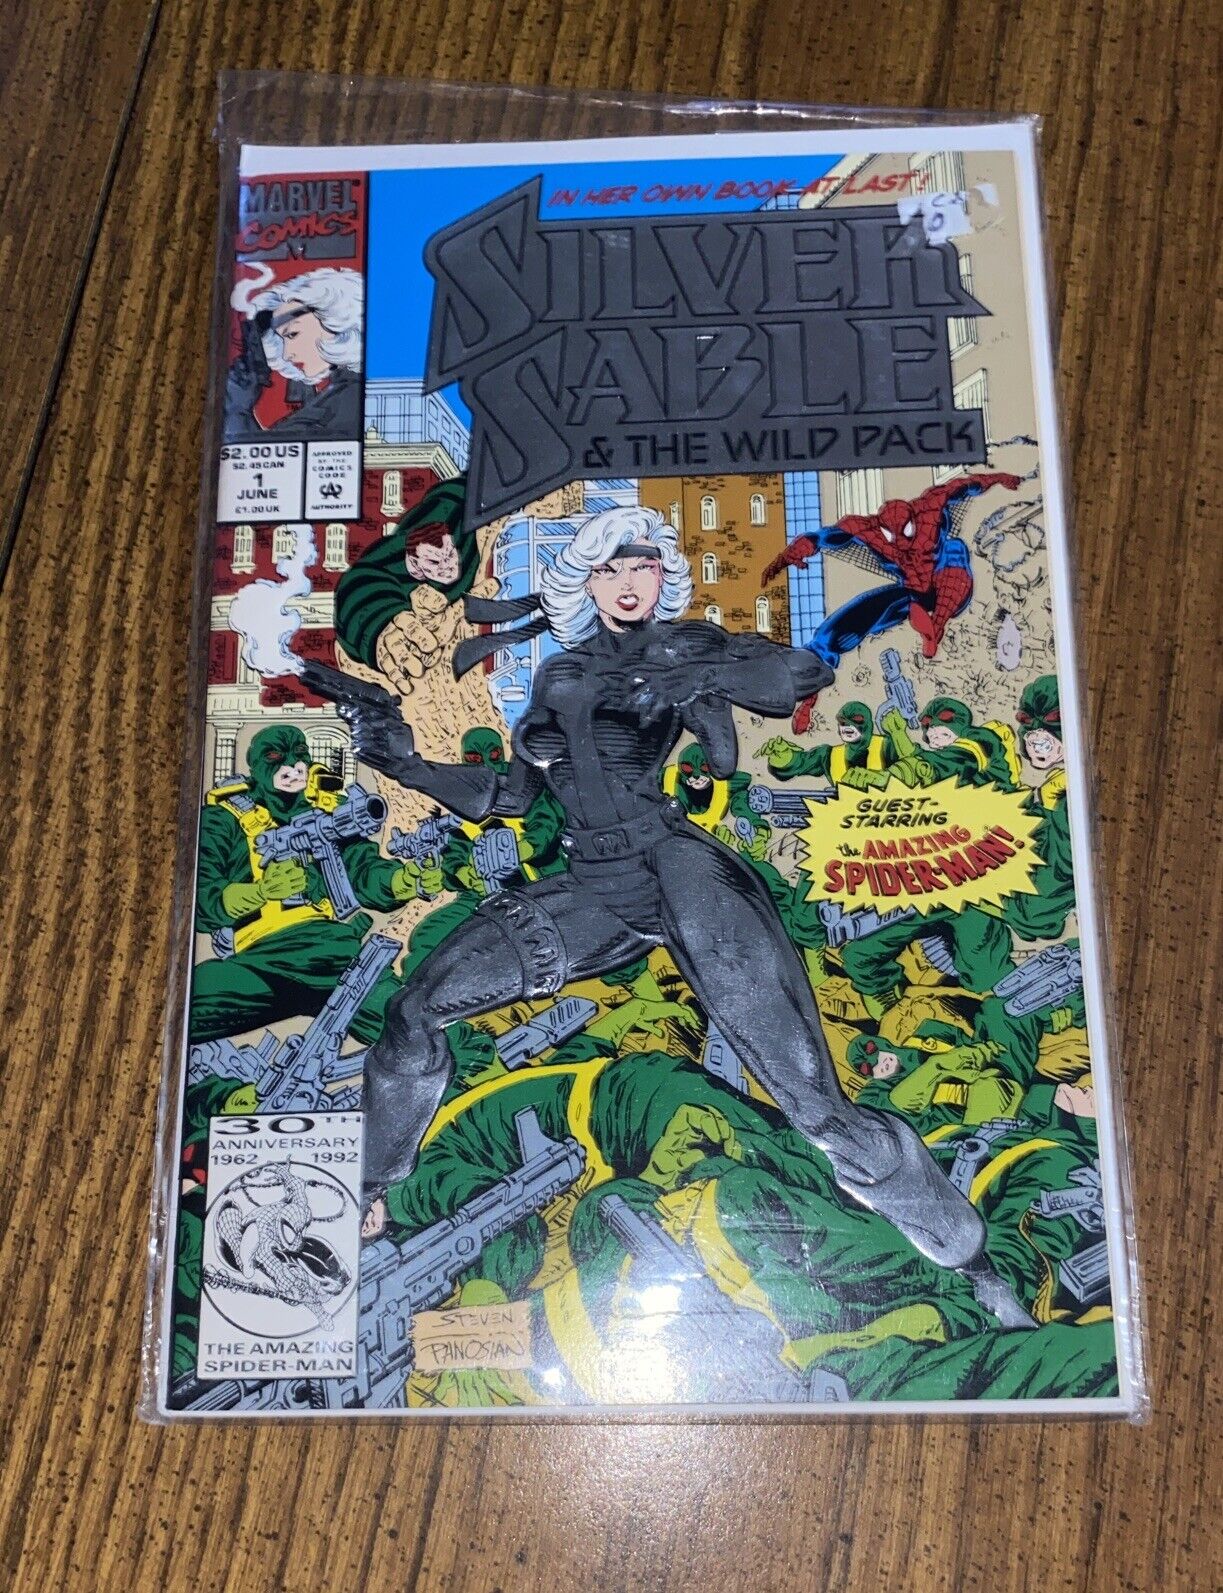 Silver Sable and the Wild Pack #1 (Marvel, June 1992)